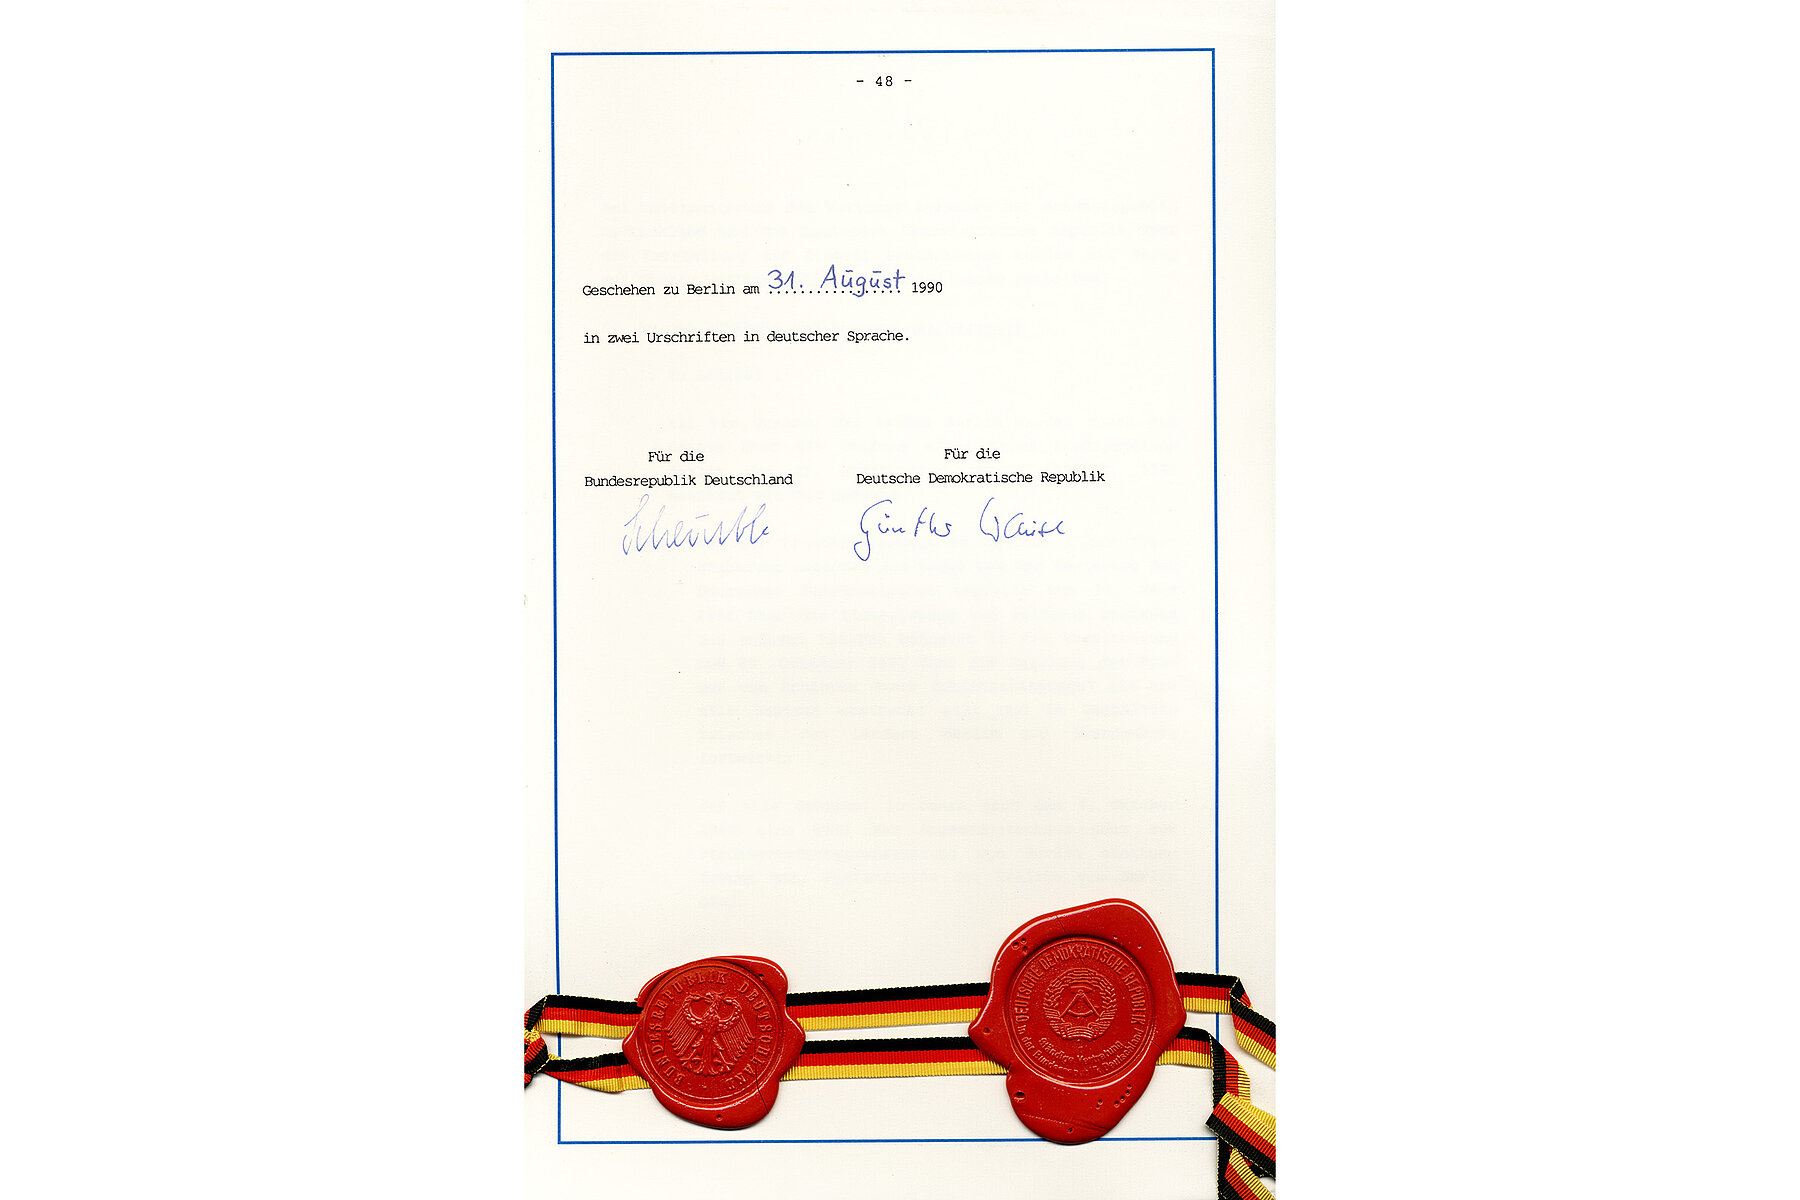 A page of the Unification Treaty. On it is written: Completed in Berlin on August 31, 1990 in two signatures. For the Federal Republic of Germany, signature Schäuble. For the GDR, signature Krause. At the bottom of the page are the red wax seals of the Federal Republic of Germany and of the GDR.